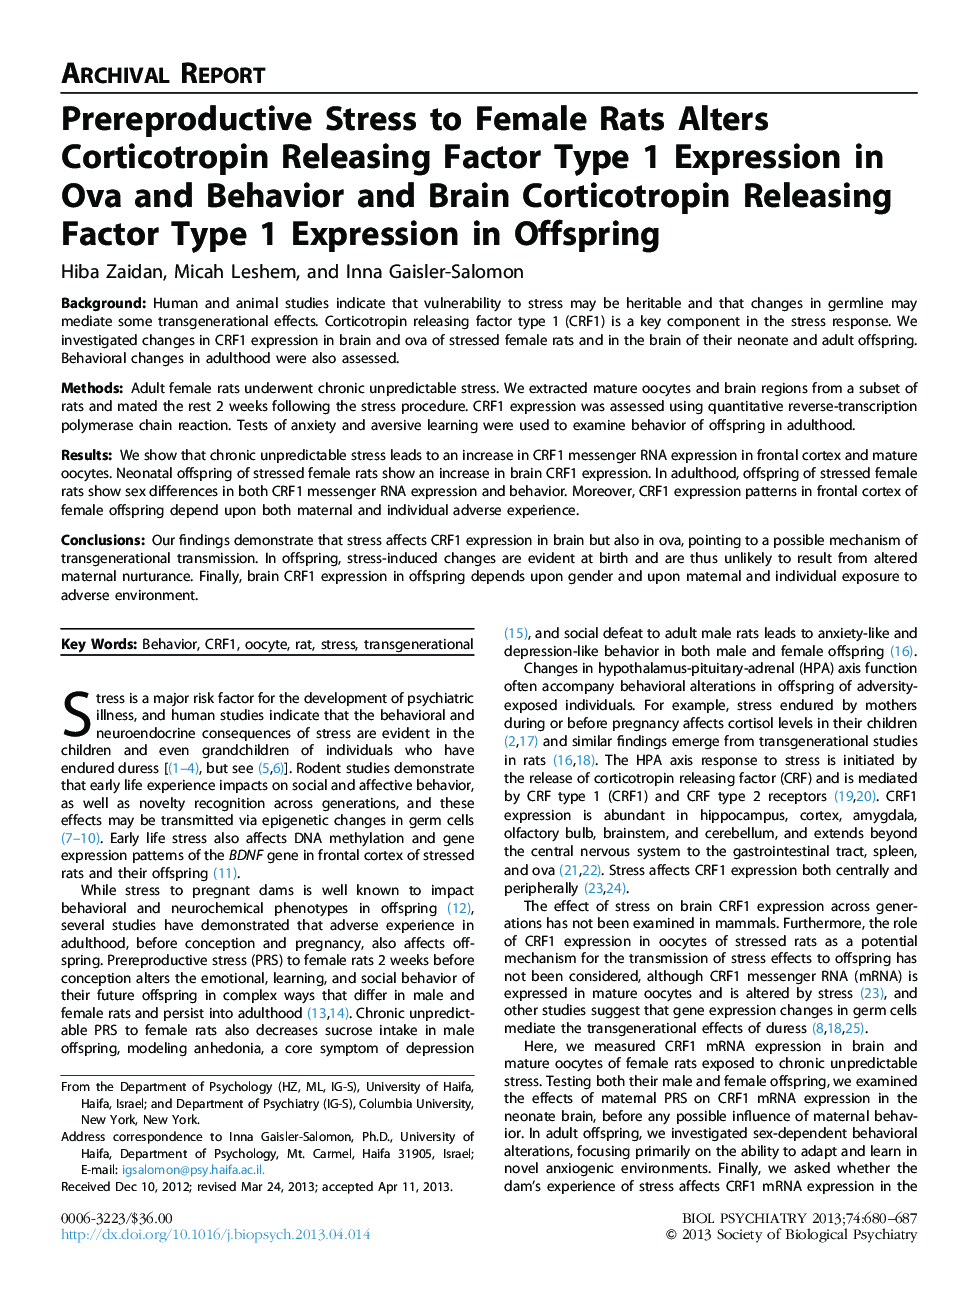 Prereproductive Stress to Female Rats Alters Corticotropin Releasing Factor Type 1 Expression in Ova and Behavior and Brain Corticotropin Releasing Factor Type 1 Expression in Offspring